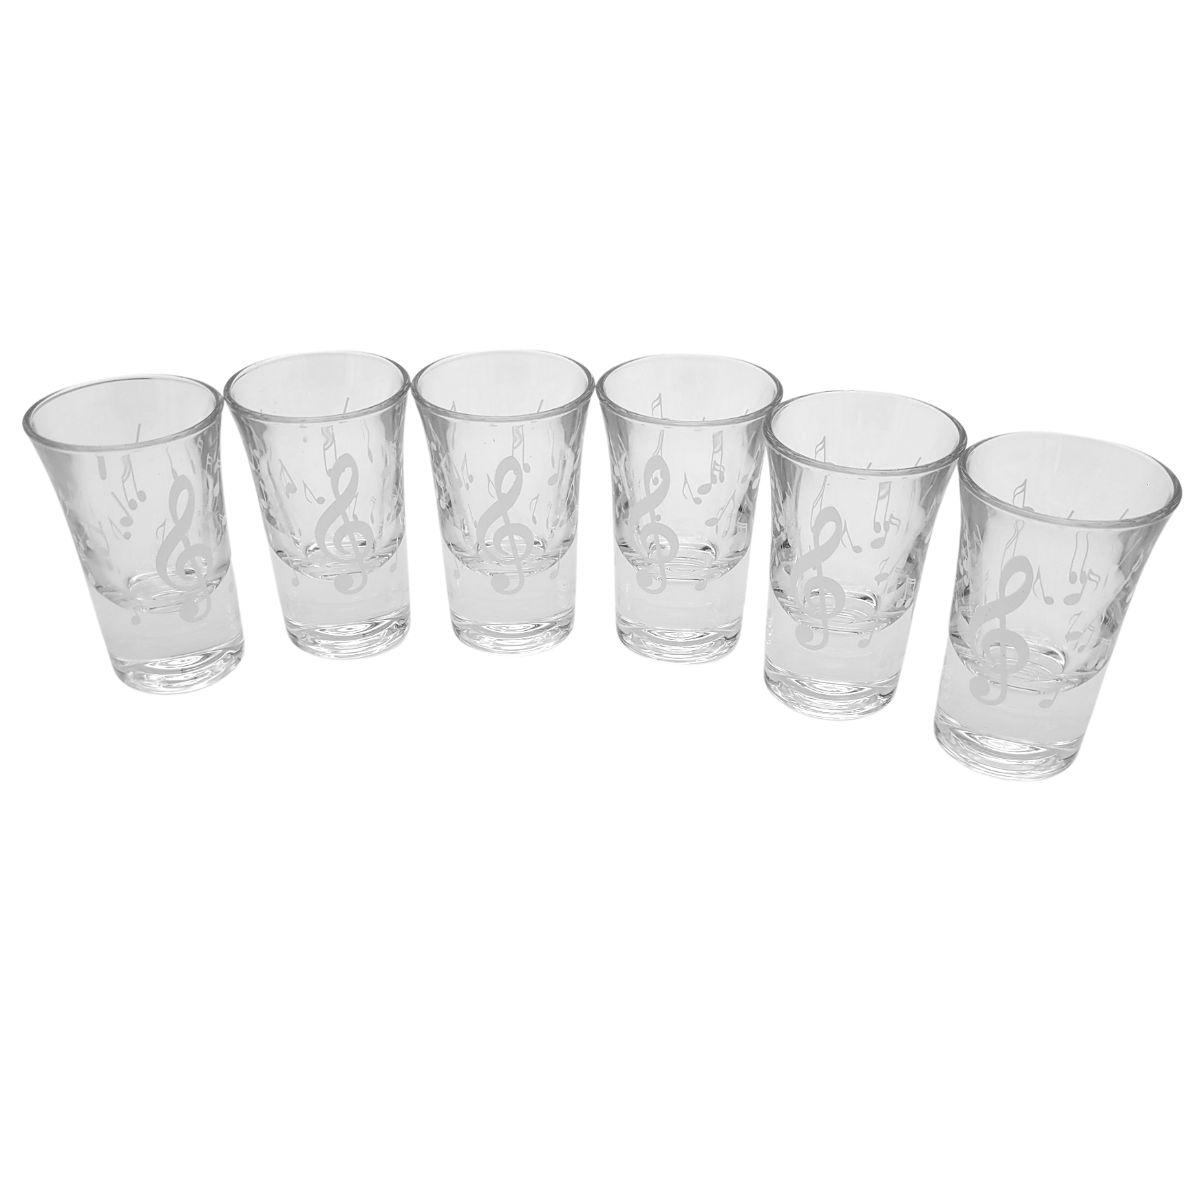 Set of 6 shot glasses with white treble clef and notes